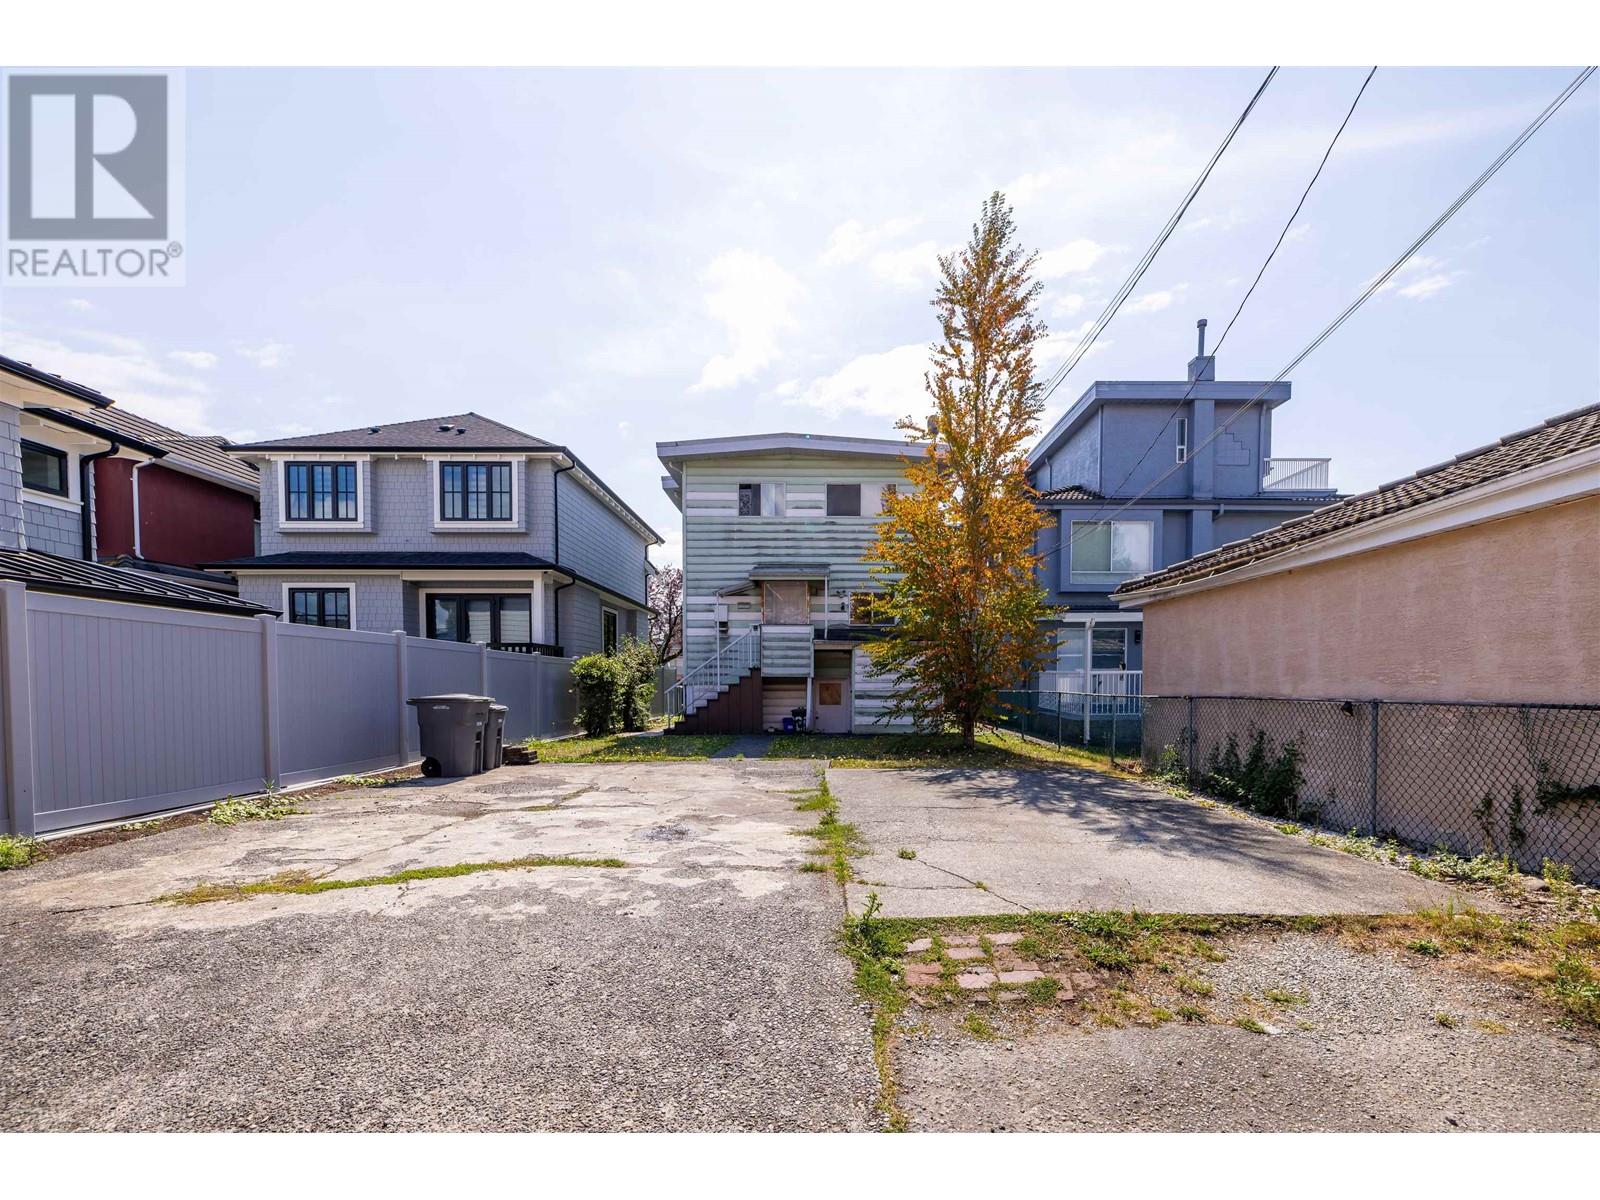 Listing Picture 4 of 16 : 2205 NEWPORT AVENUE, Vancouver / 溫哥華 - 魯藝地產 Yvonne Lu Group - MLS Medallion Club Member